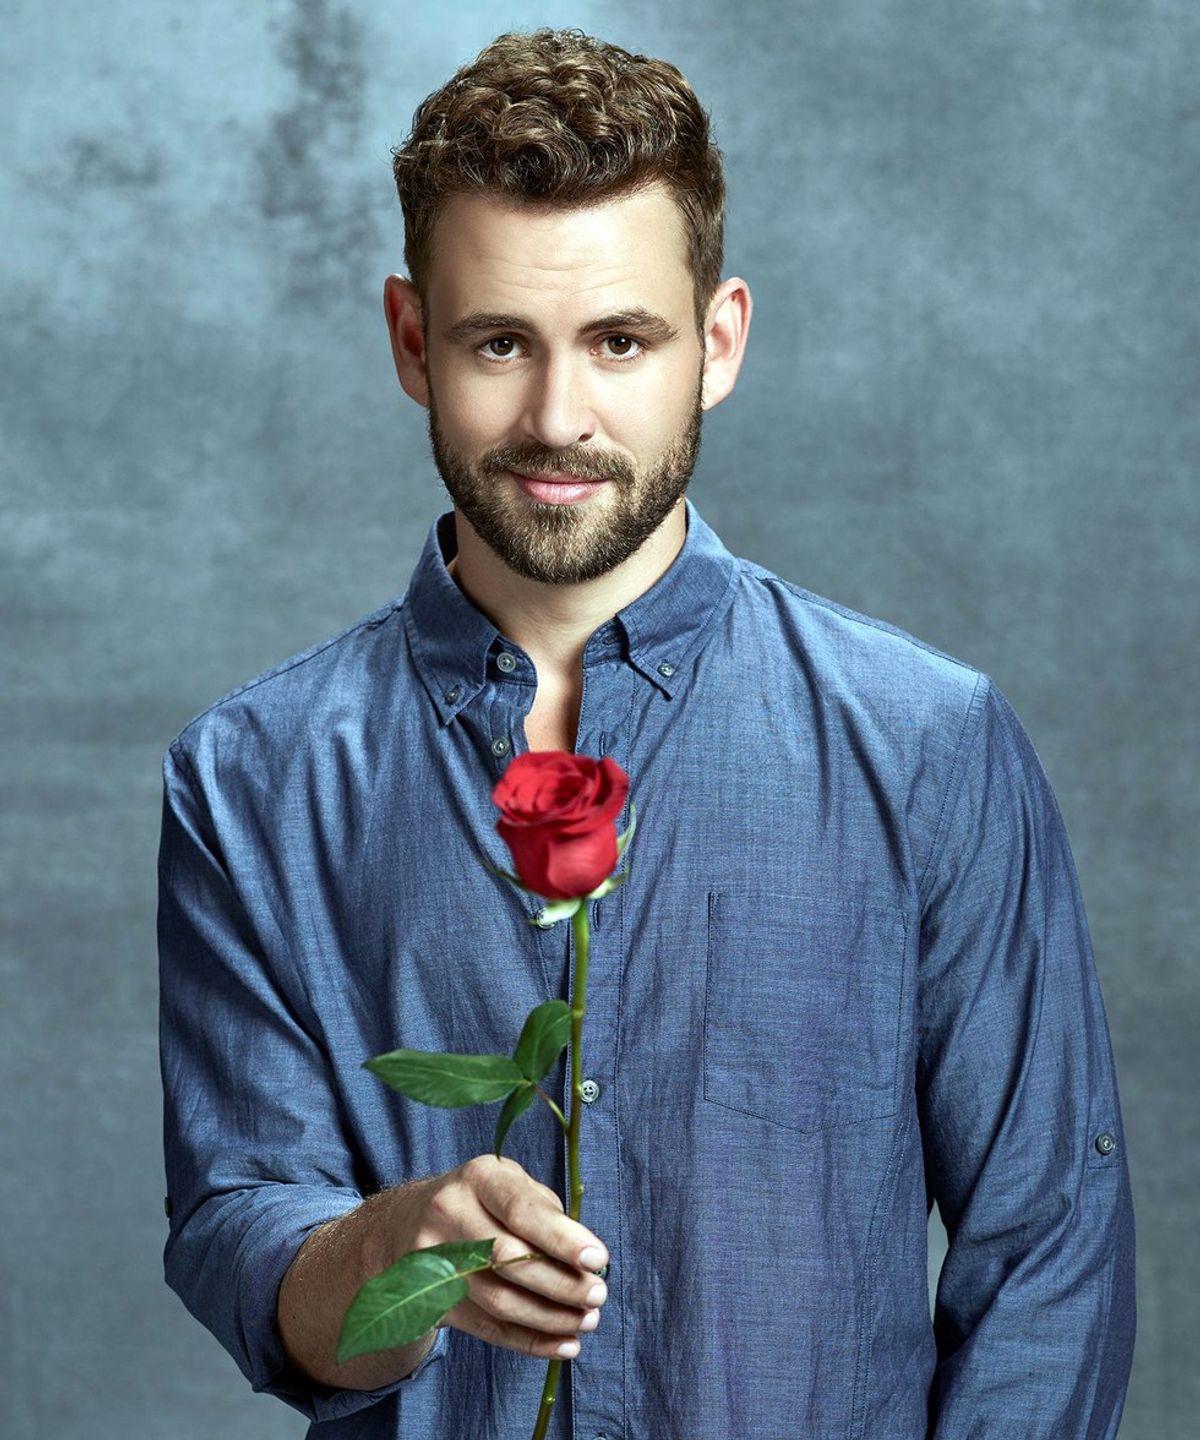 What Message Does 'The Bachelor' Really Send?